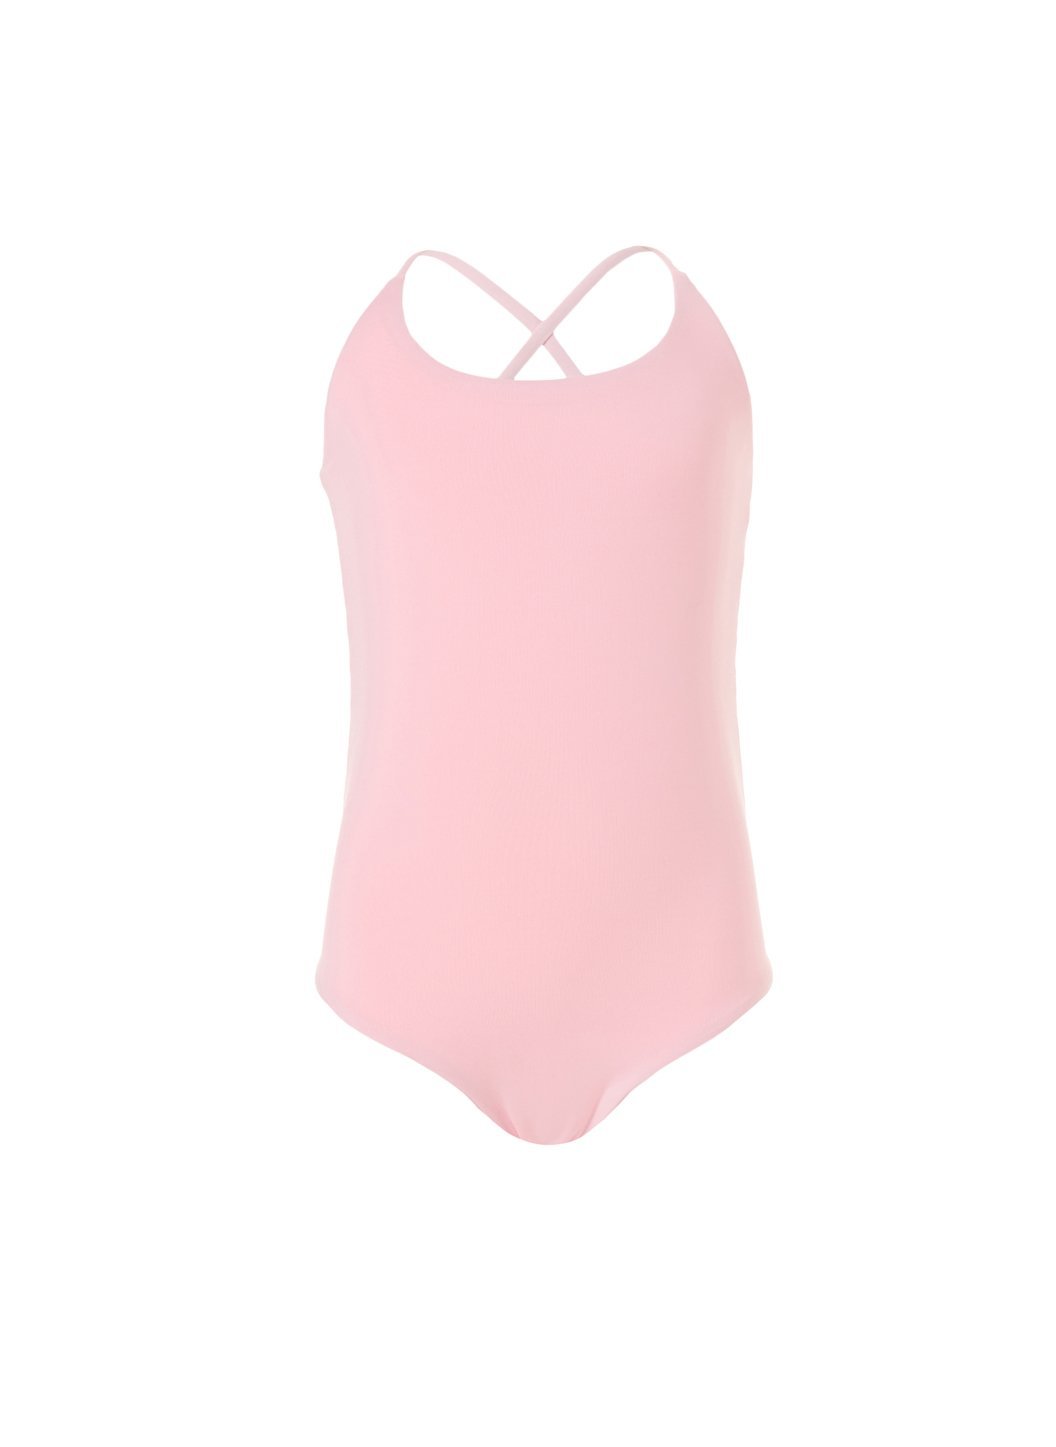 baby vicky pale pink neon cross back onepiece swimsuit 2019 2